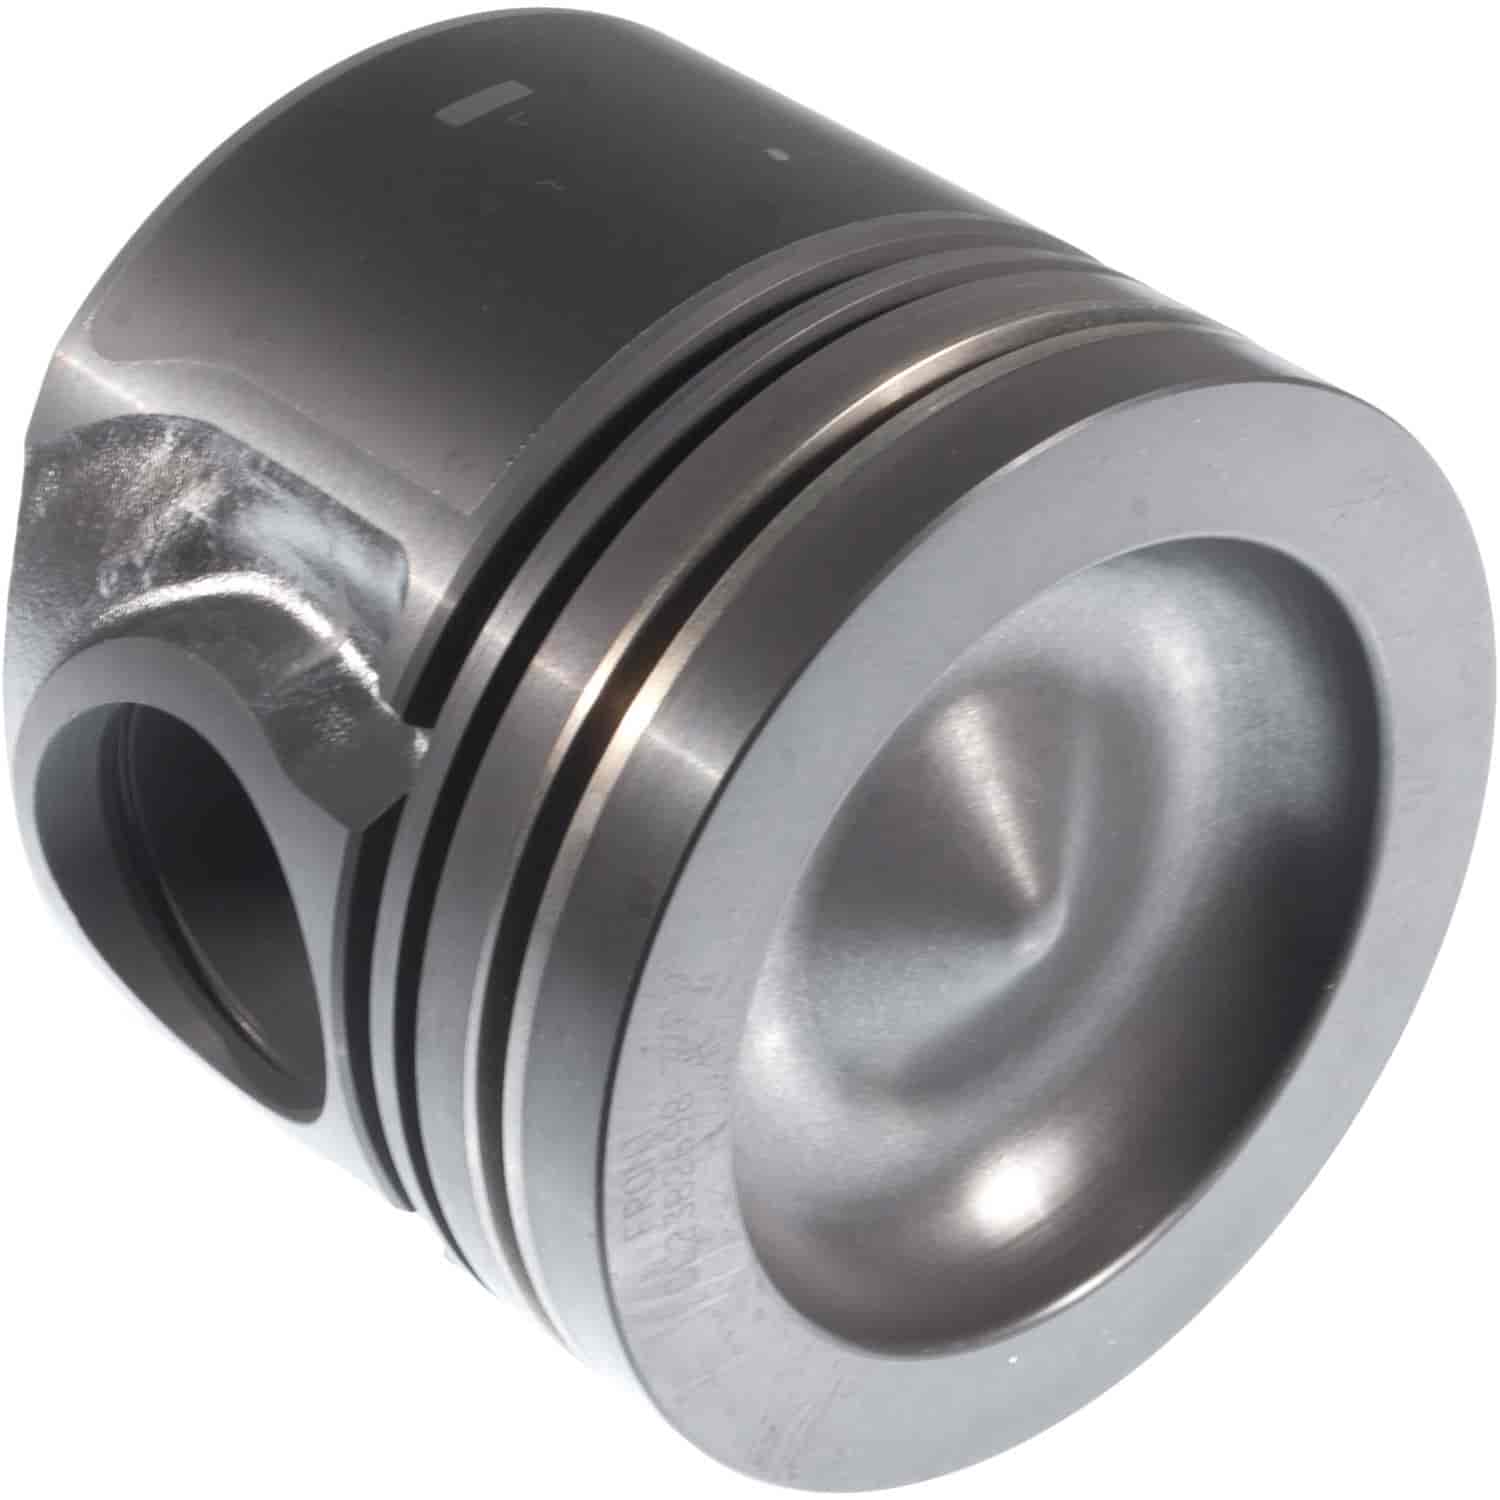 Piston Without Piston Pin Cat. 110mm/4.331 Bore C7 requires 223-1962 pin 223-5516 locks